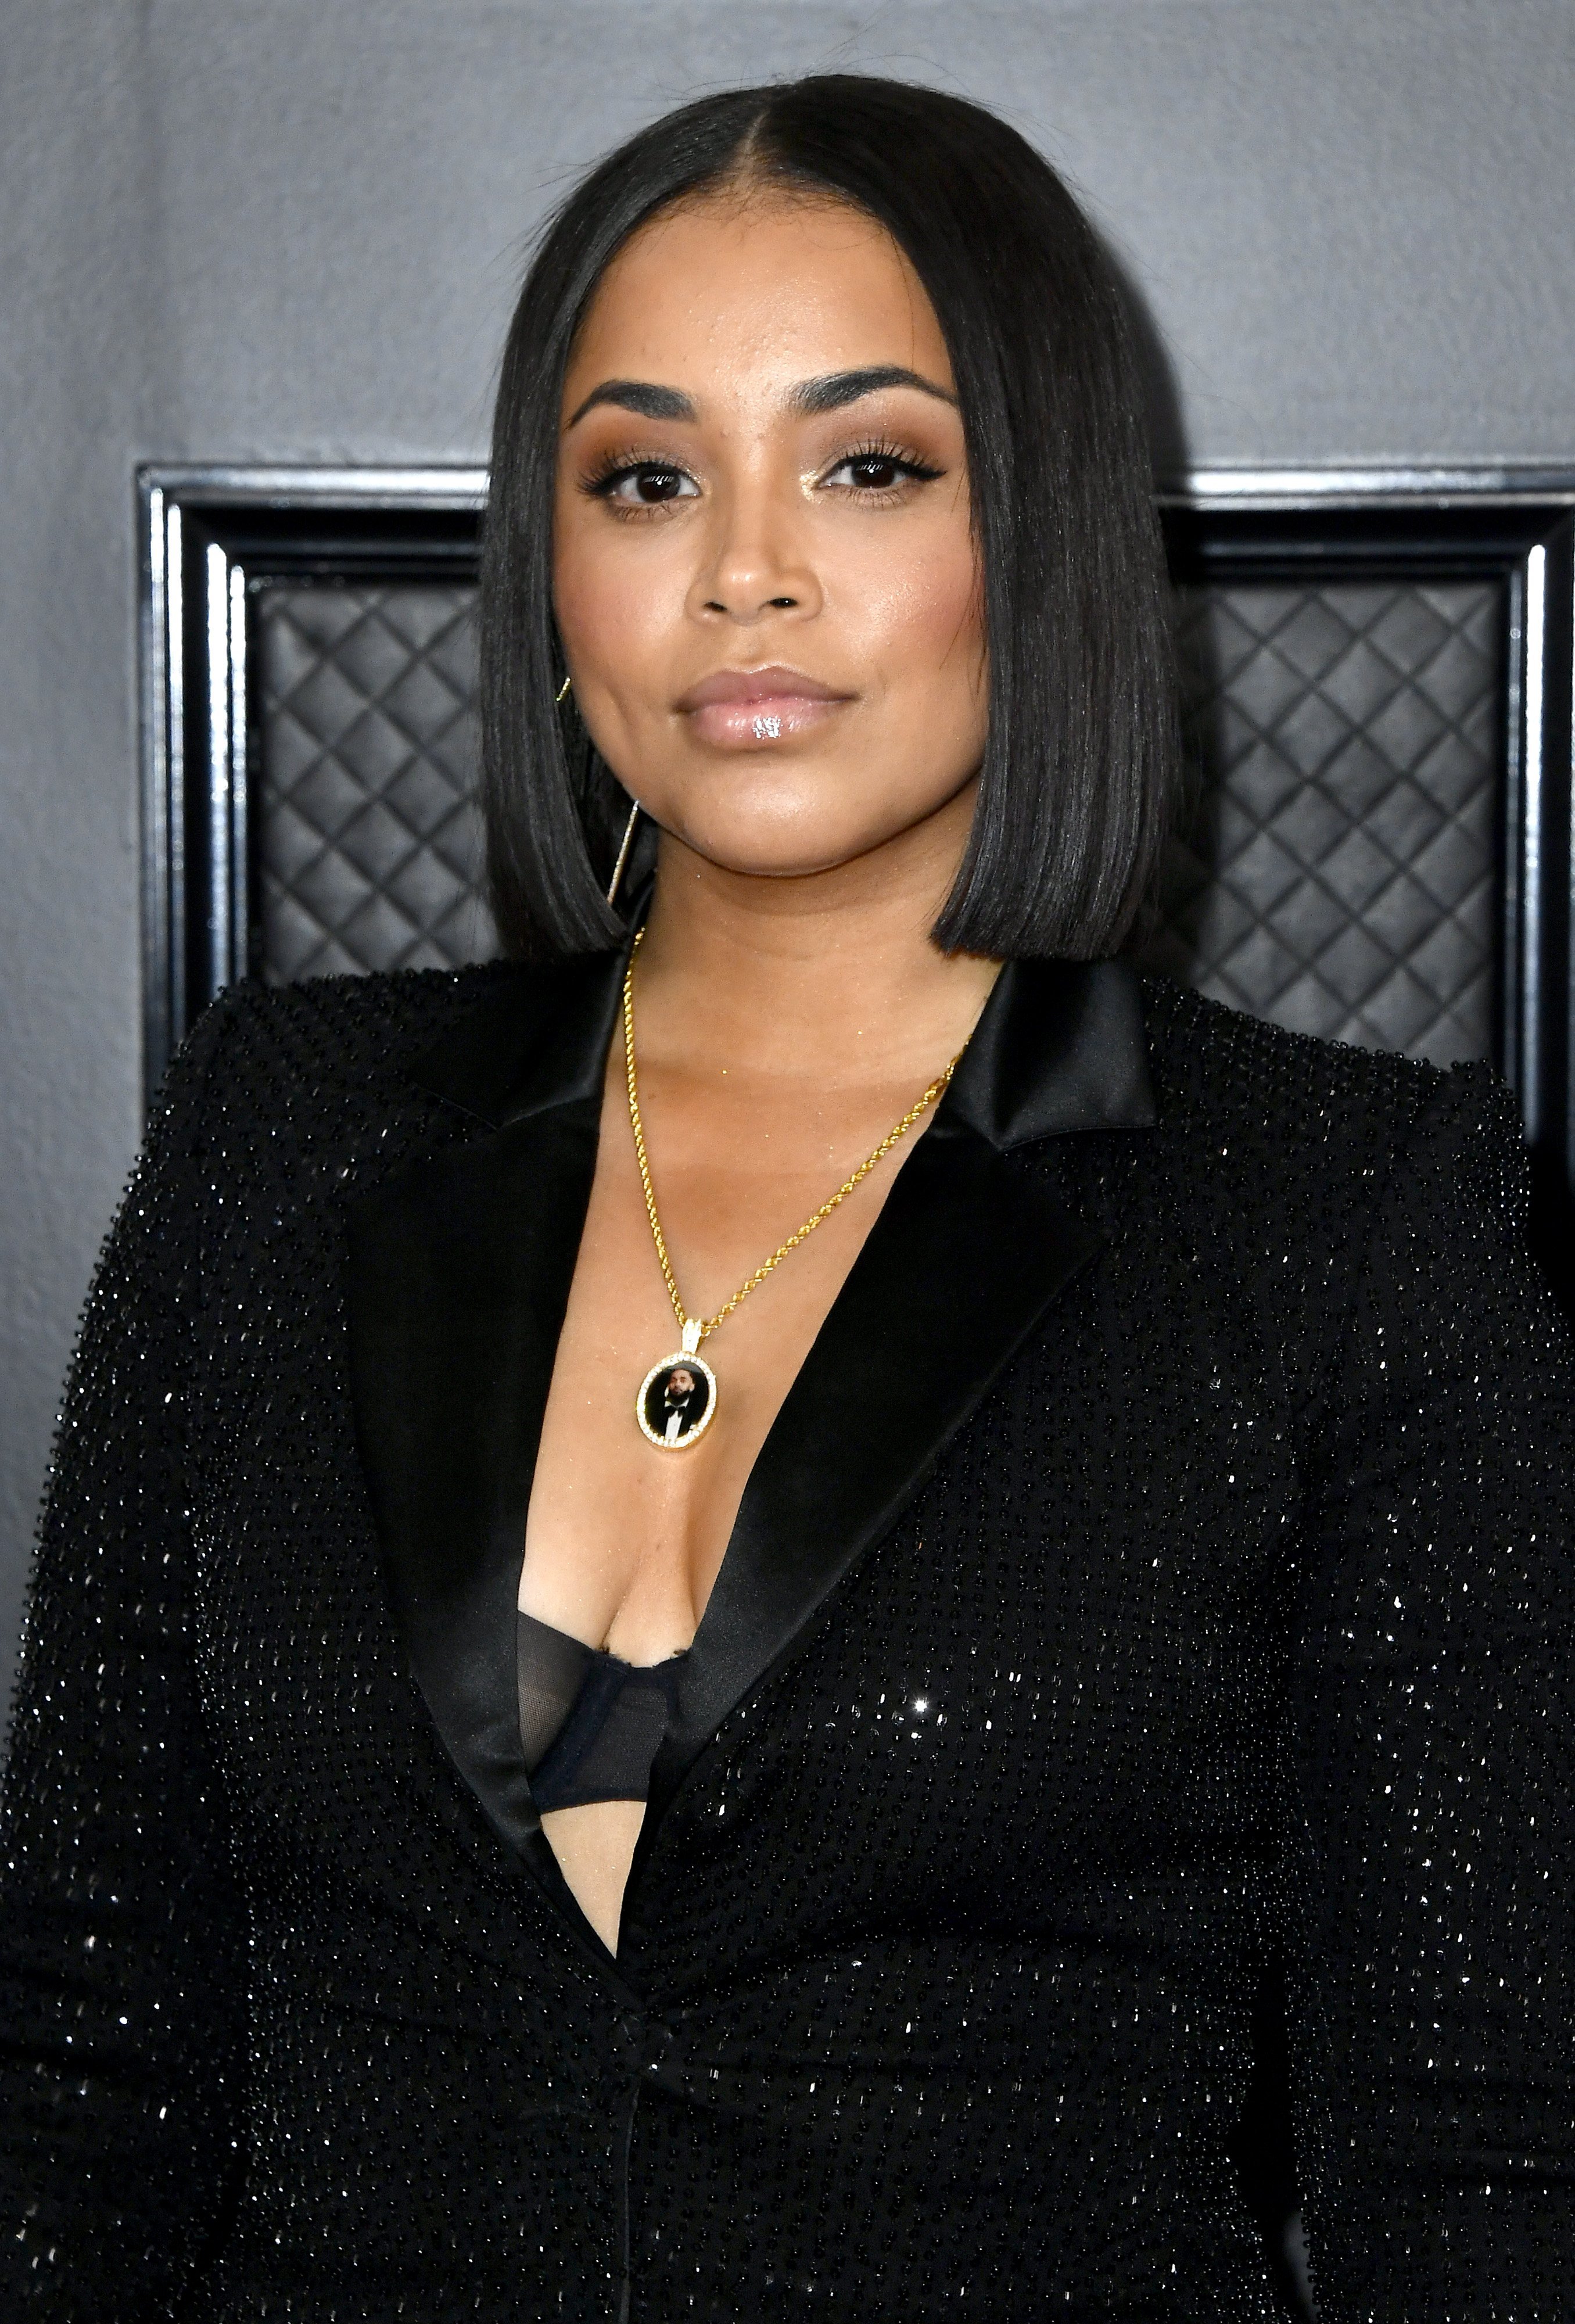 Lauren London attends the 62nd Annual GRAMMY Awards on Jan. 26, 2020 in California | Photo: Getty Images